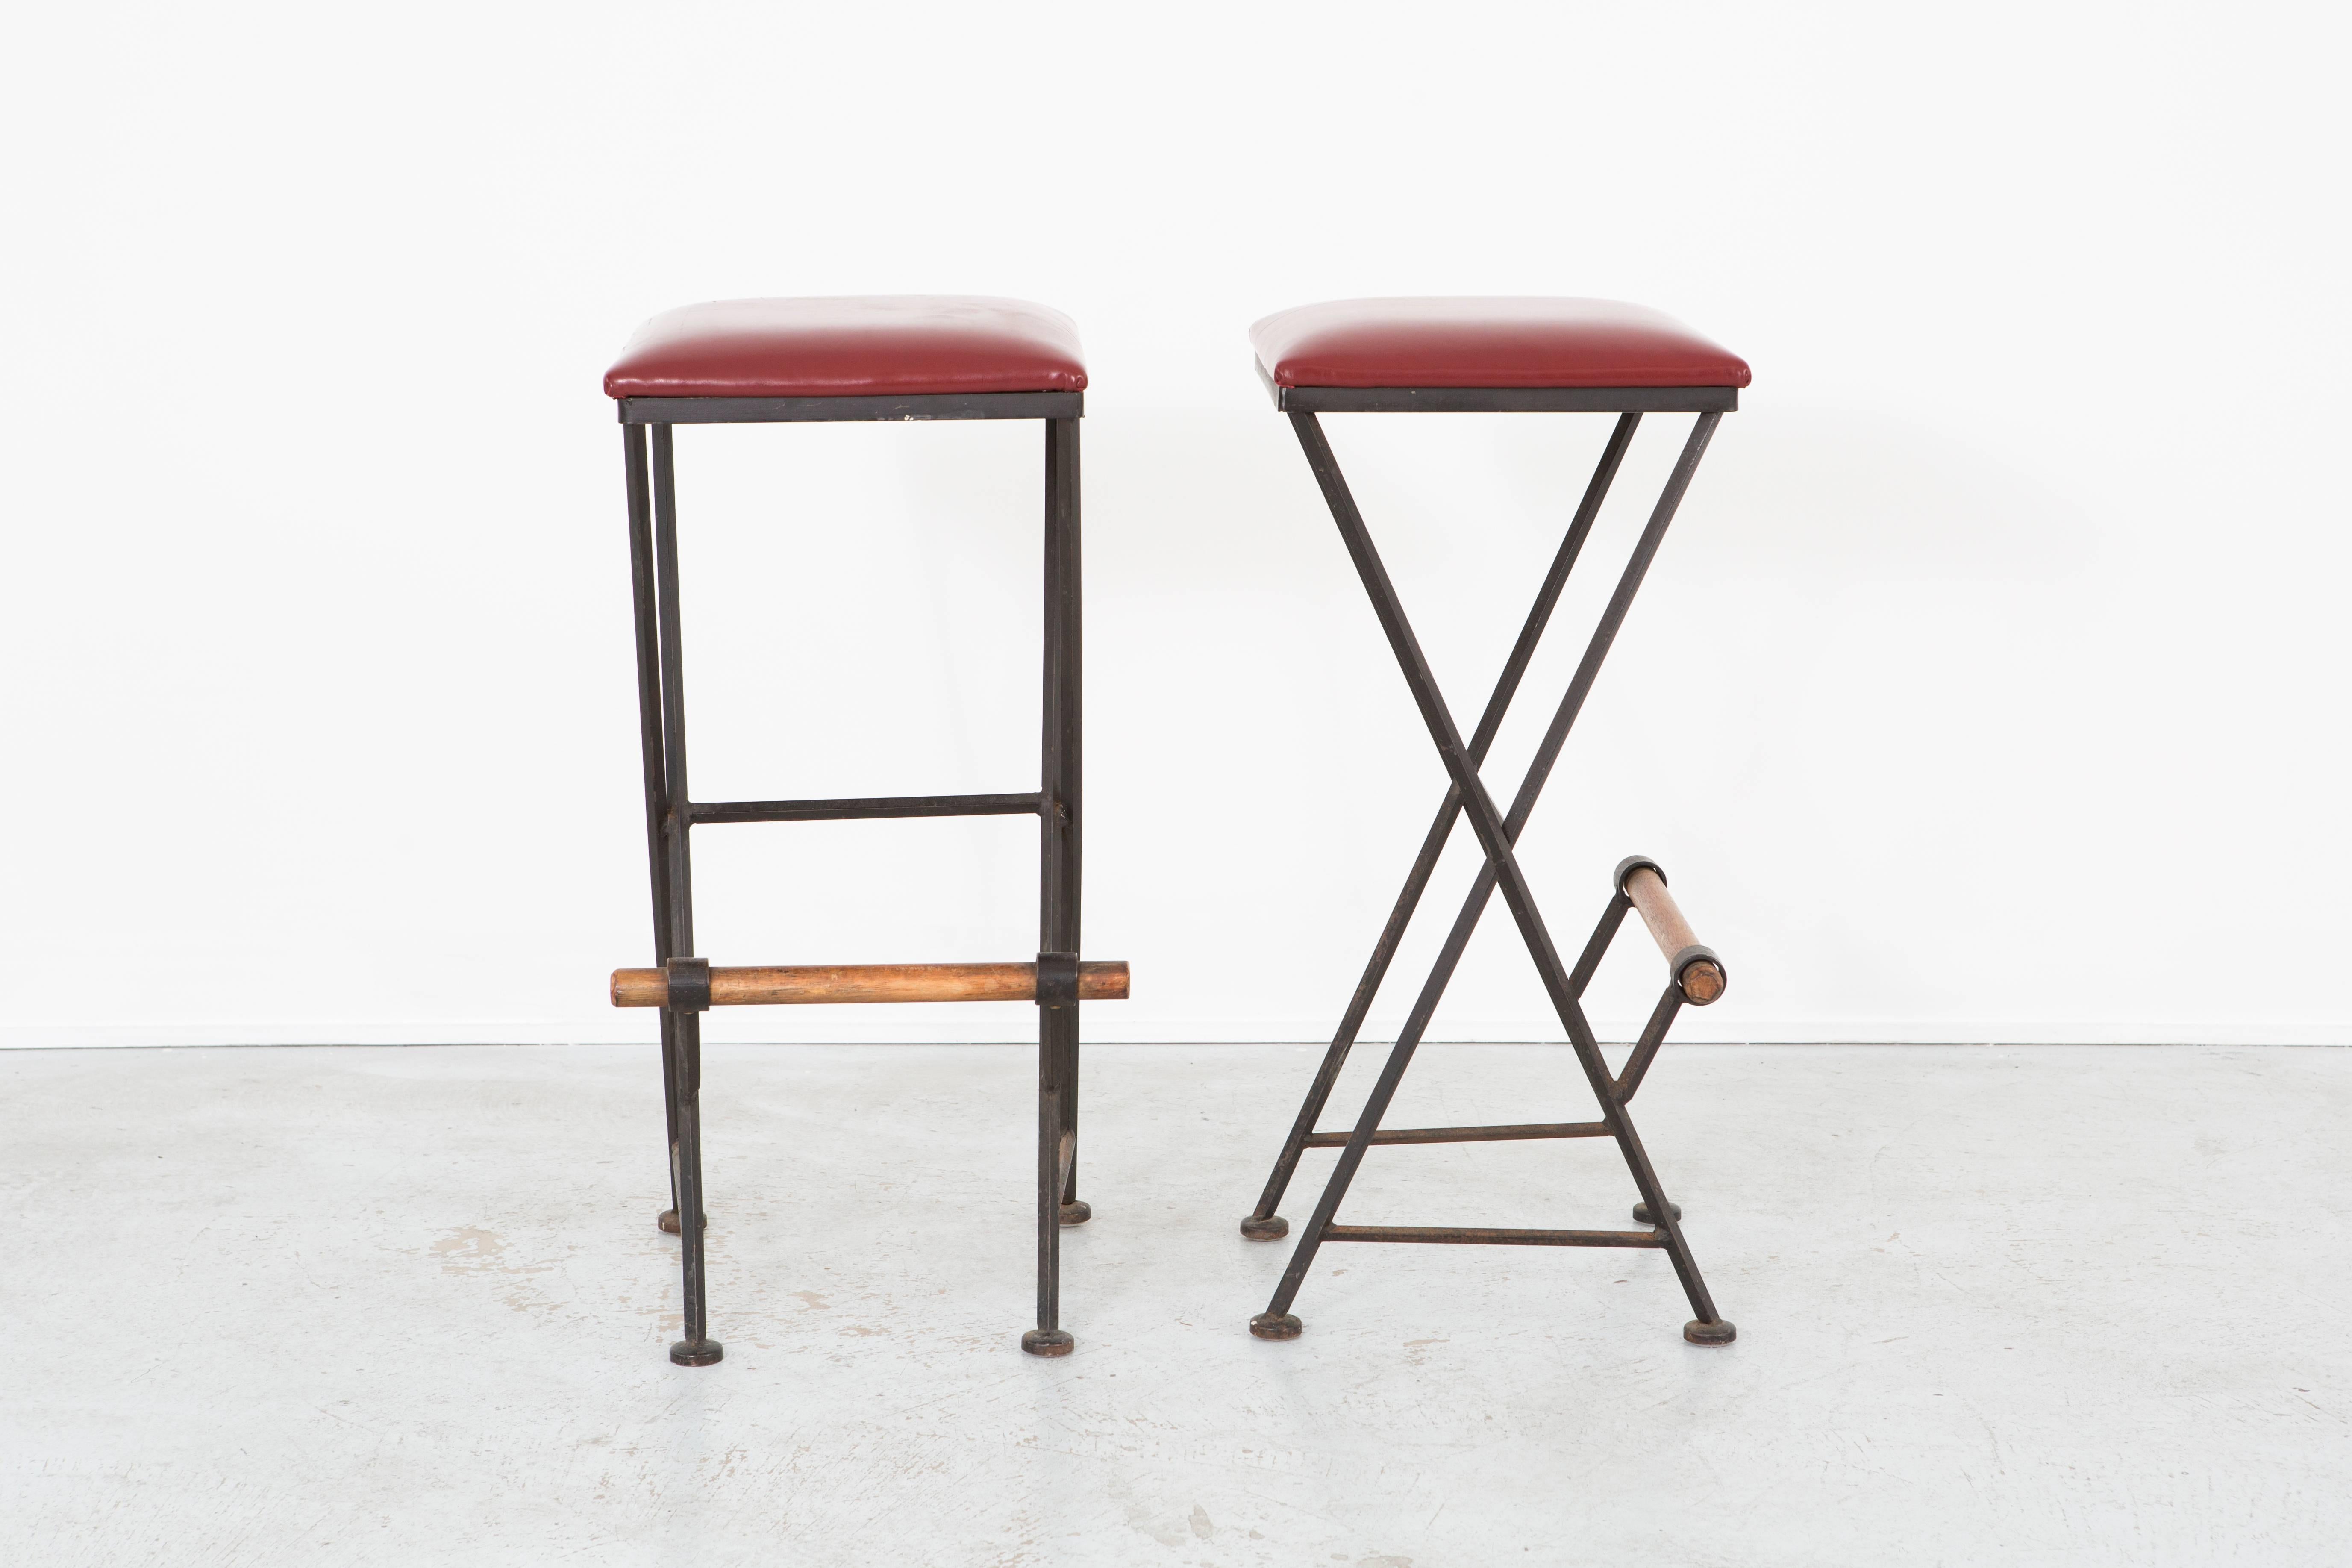 Set of stools

Designed by Cleo Baldon

USA, circa 1960s

Reupholstered full grain oxblood red leather, wrought iron and oak

Measures: 32 ¼” H x 16” W x 15 ¾” D x seat 29 ½” H

Wrought iron and oak have nice patina

Sold as a set.